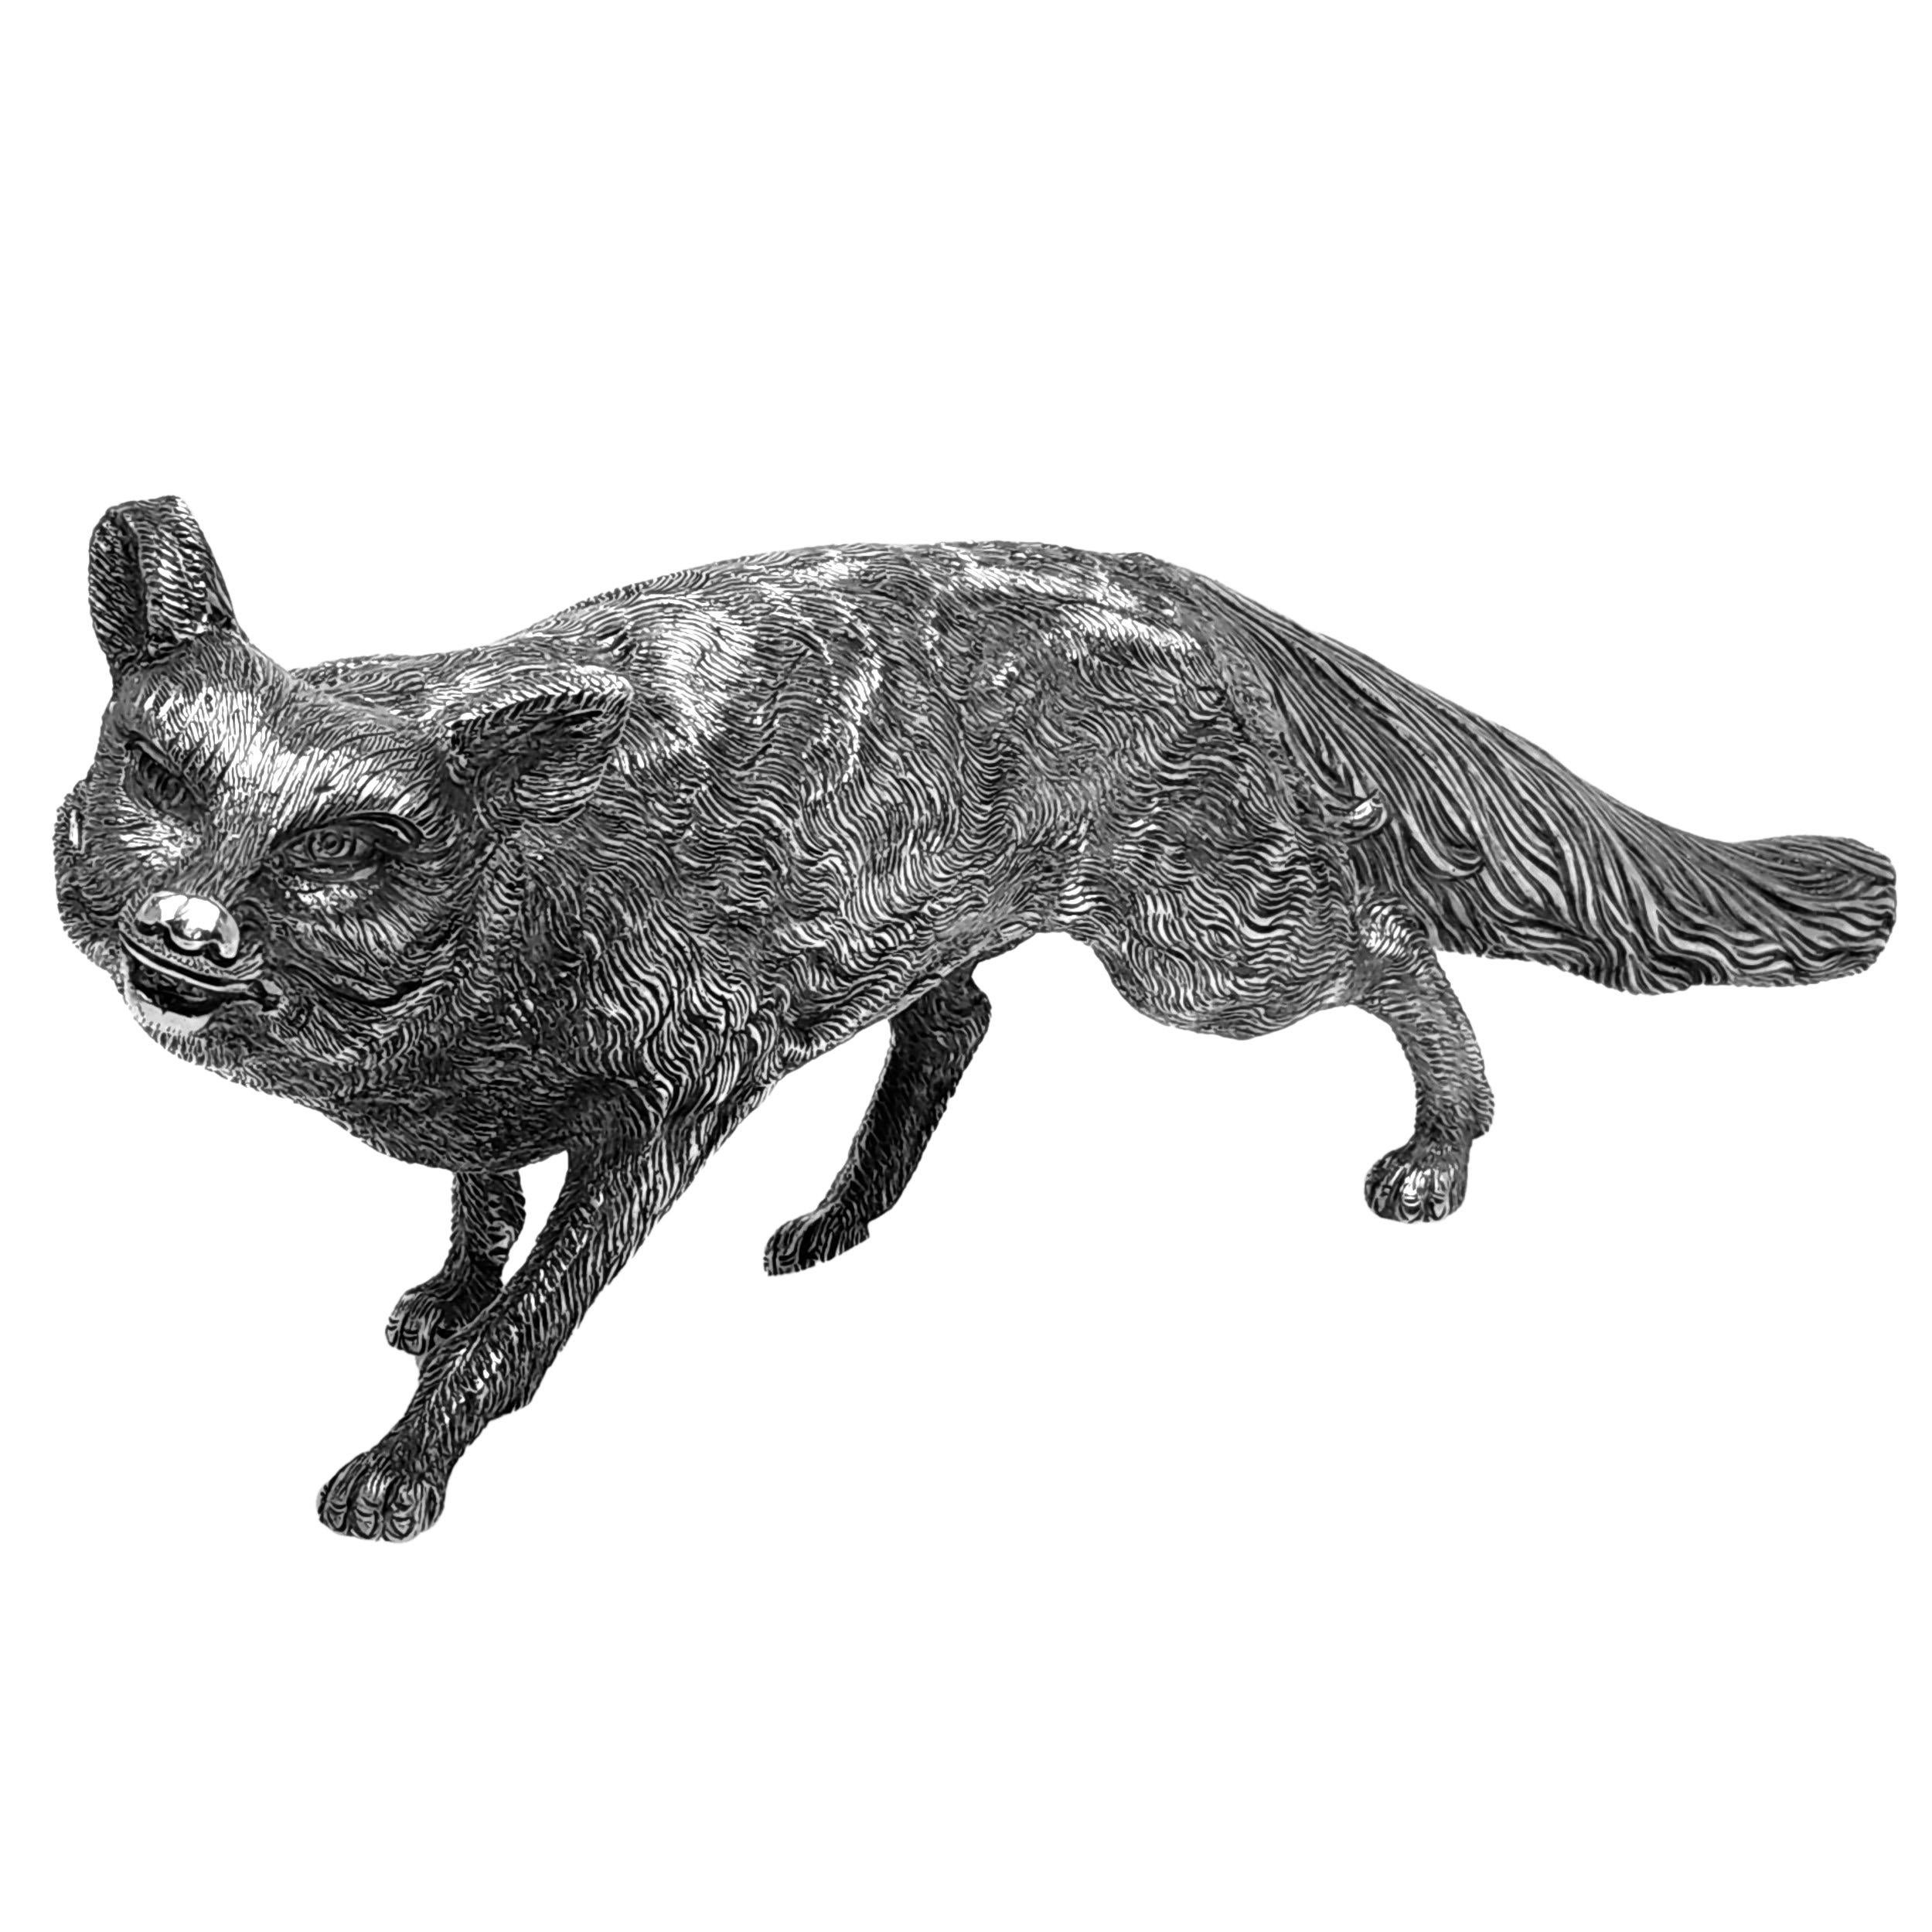 An excellent Solid Silver Model depicting a stalking Fox. This Sterling Silver Fox Figurine is of heavy weight and is modelled with a lovely attention to detail.

Made in Sheffield, England in 2000 by C J Vander.

Approx. Weight - 1430g /